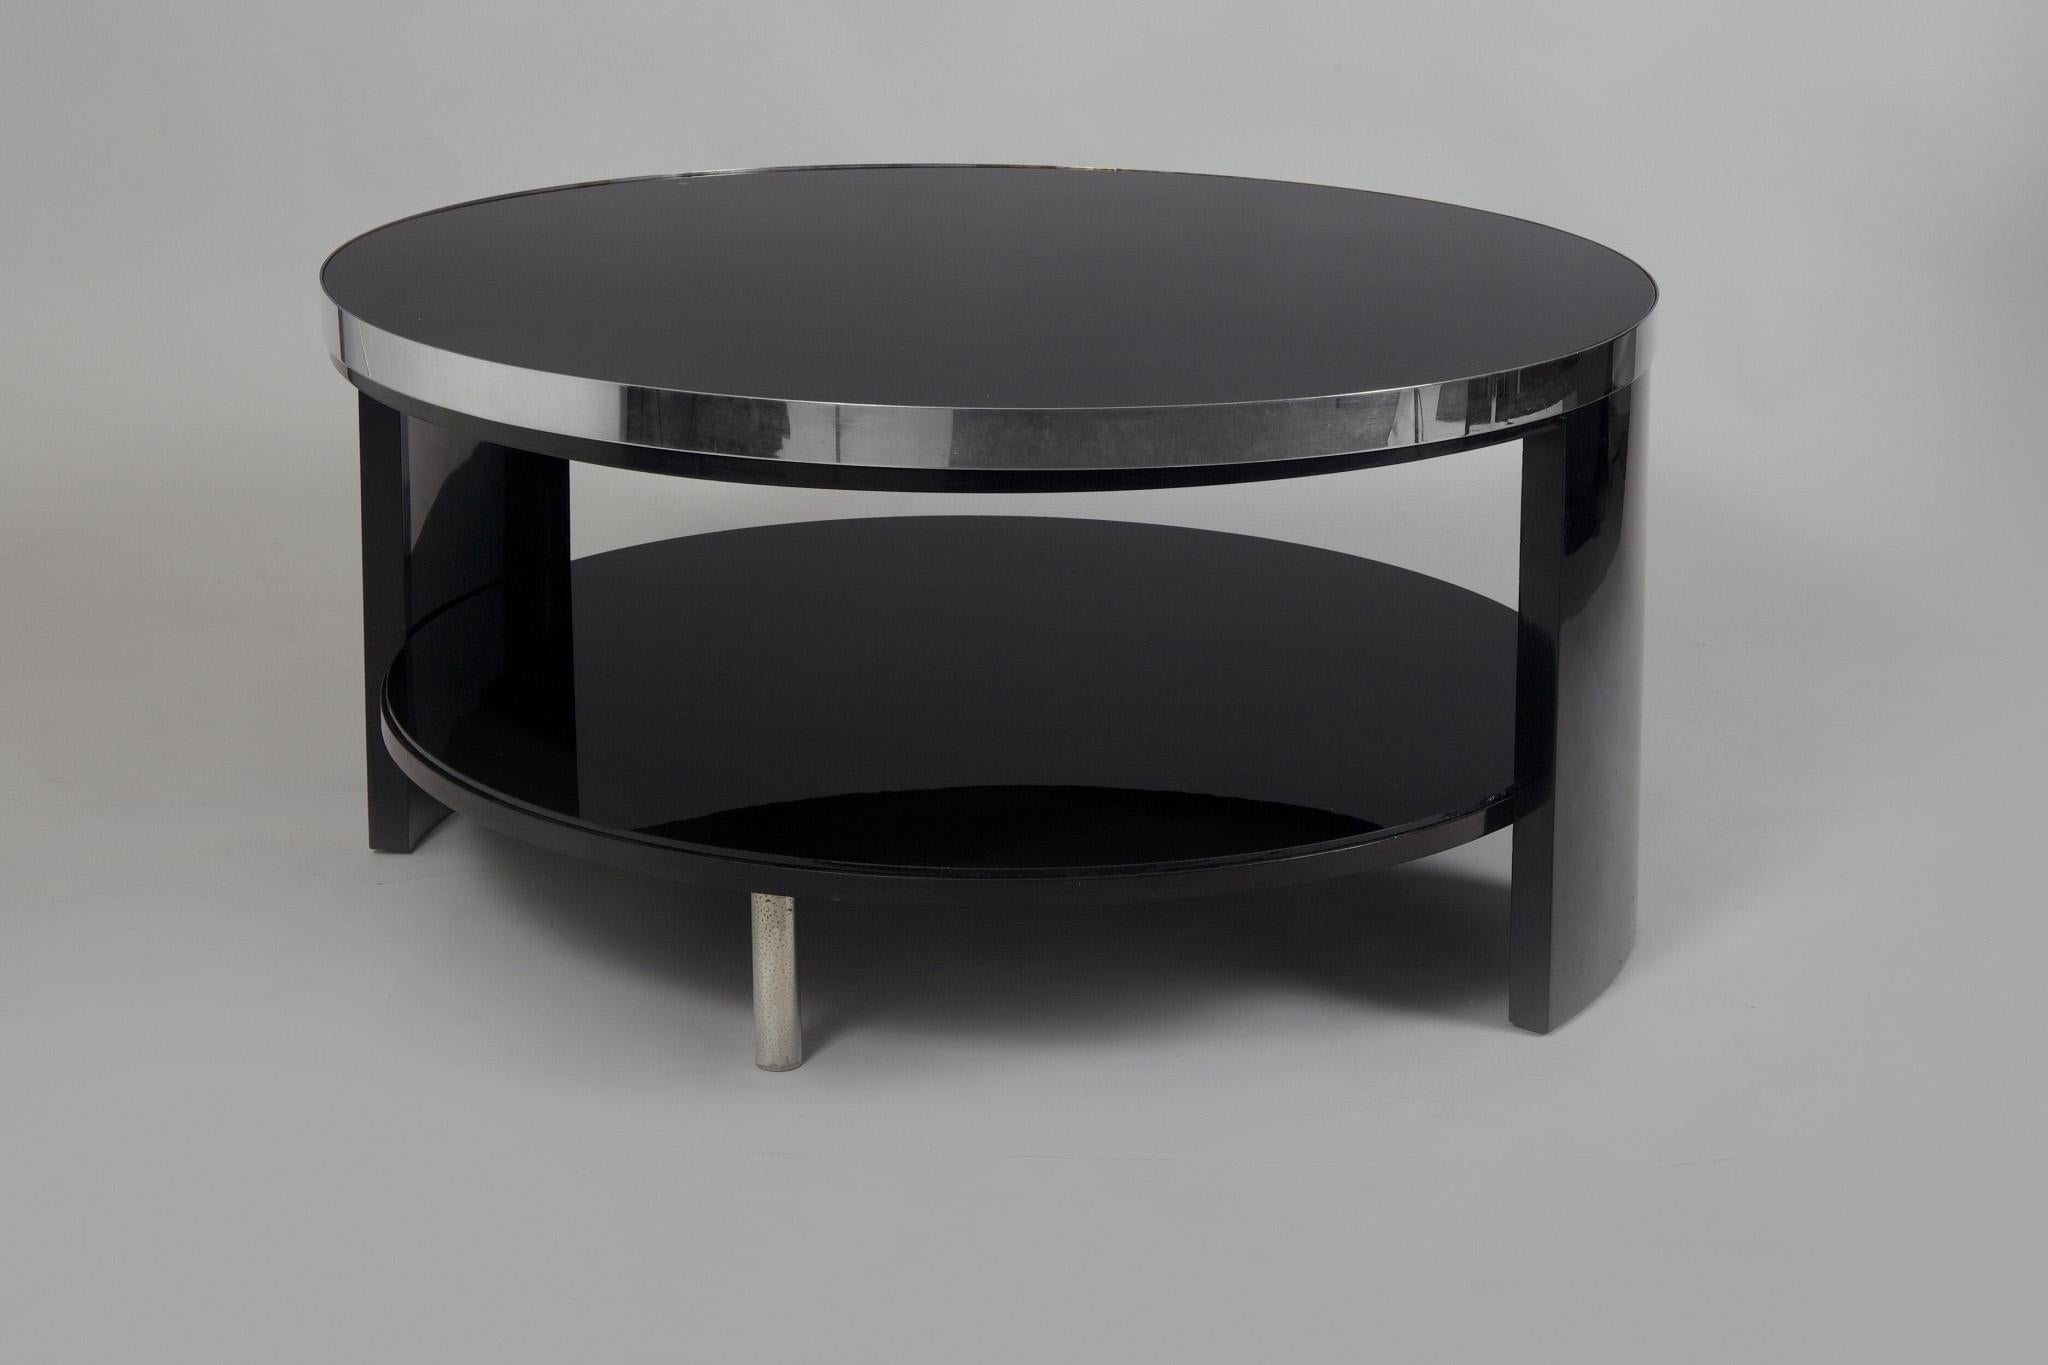 Black Art Deco coffee table made in 1930s Czechia and restored by our team. Made out of wood, polished and refinished.